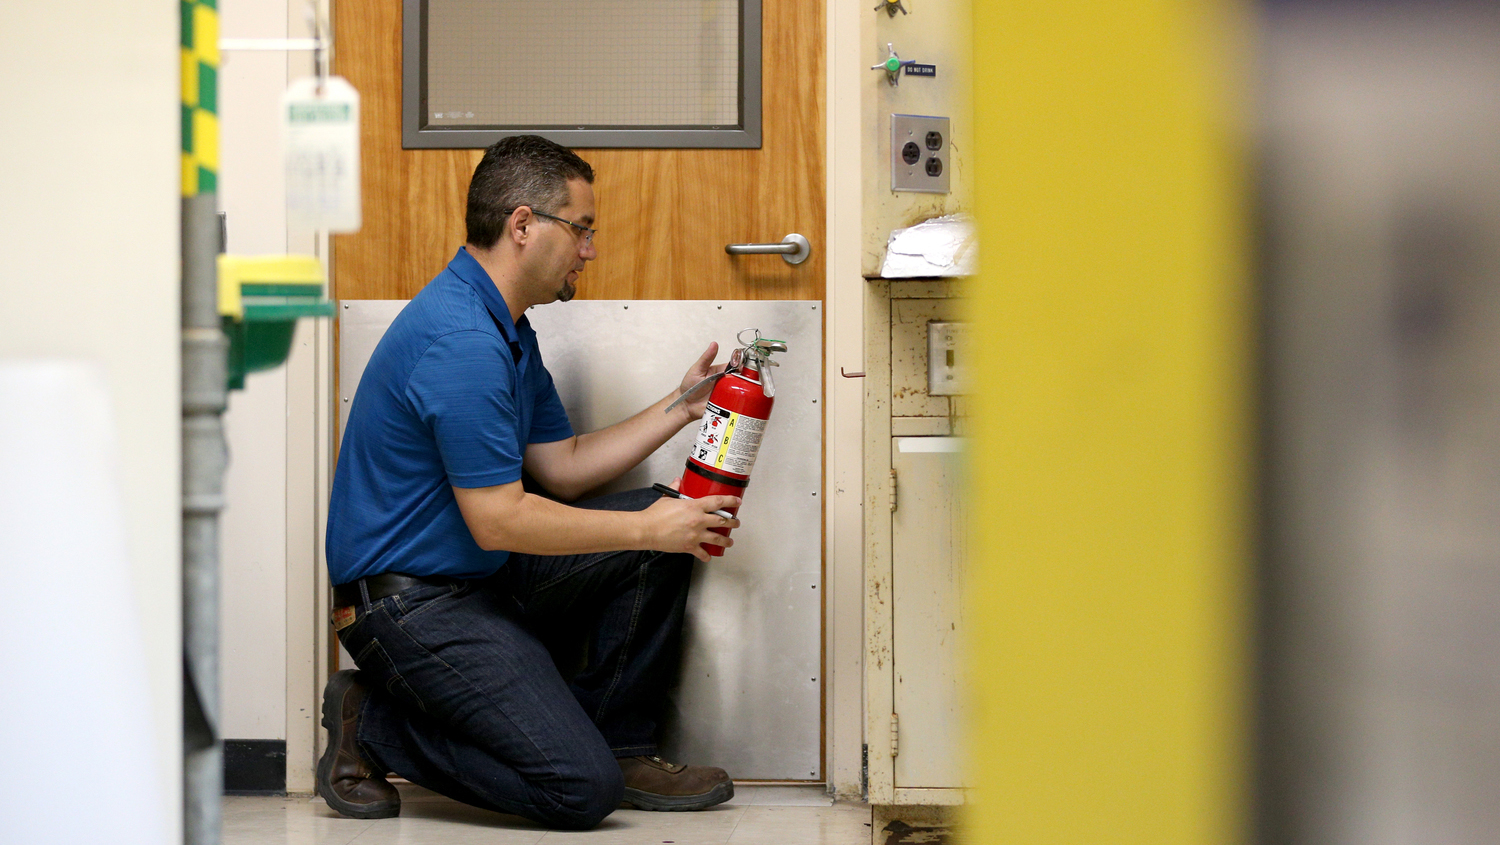 Male employee kneeling in front of a door looking at a fire extinguisher